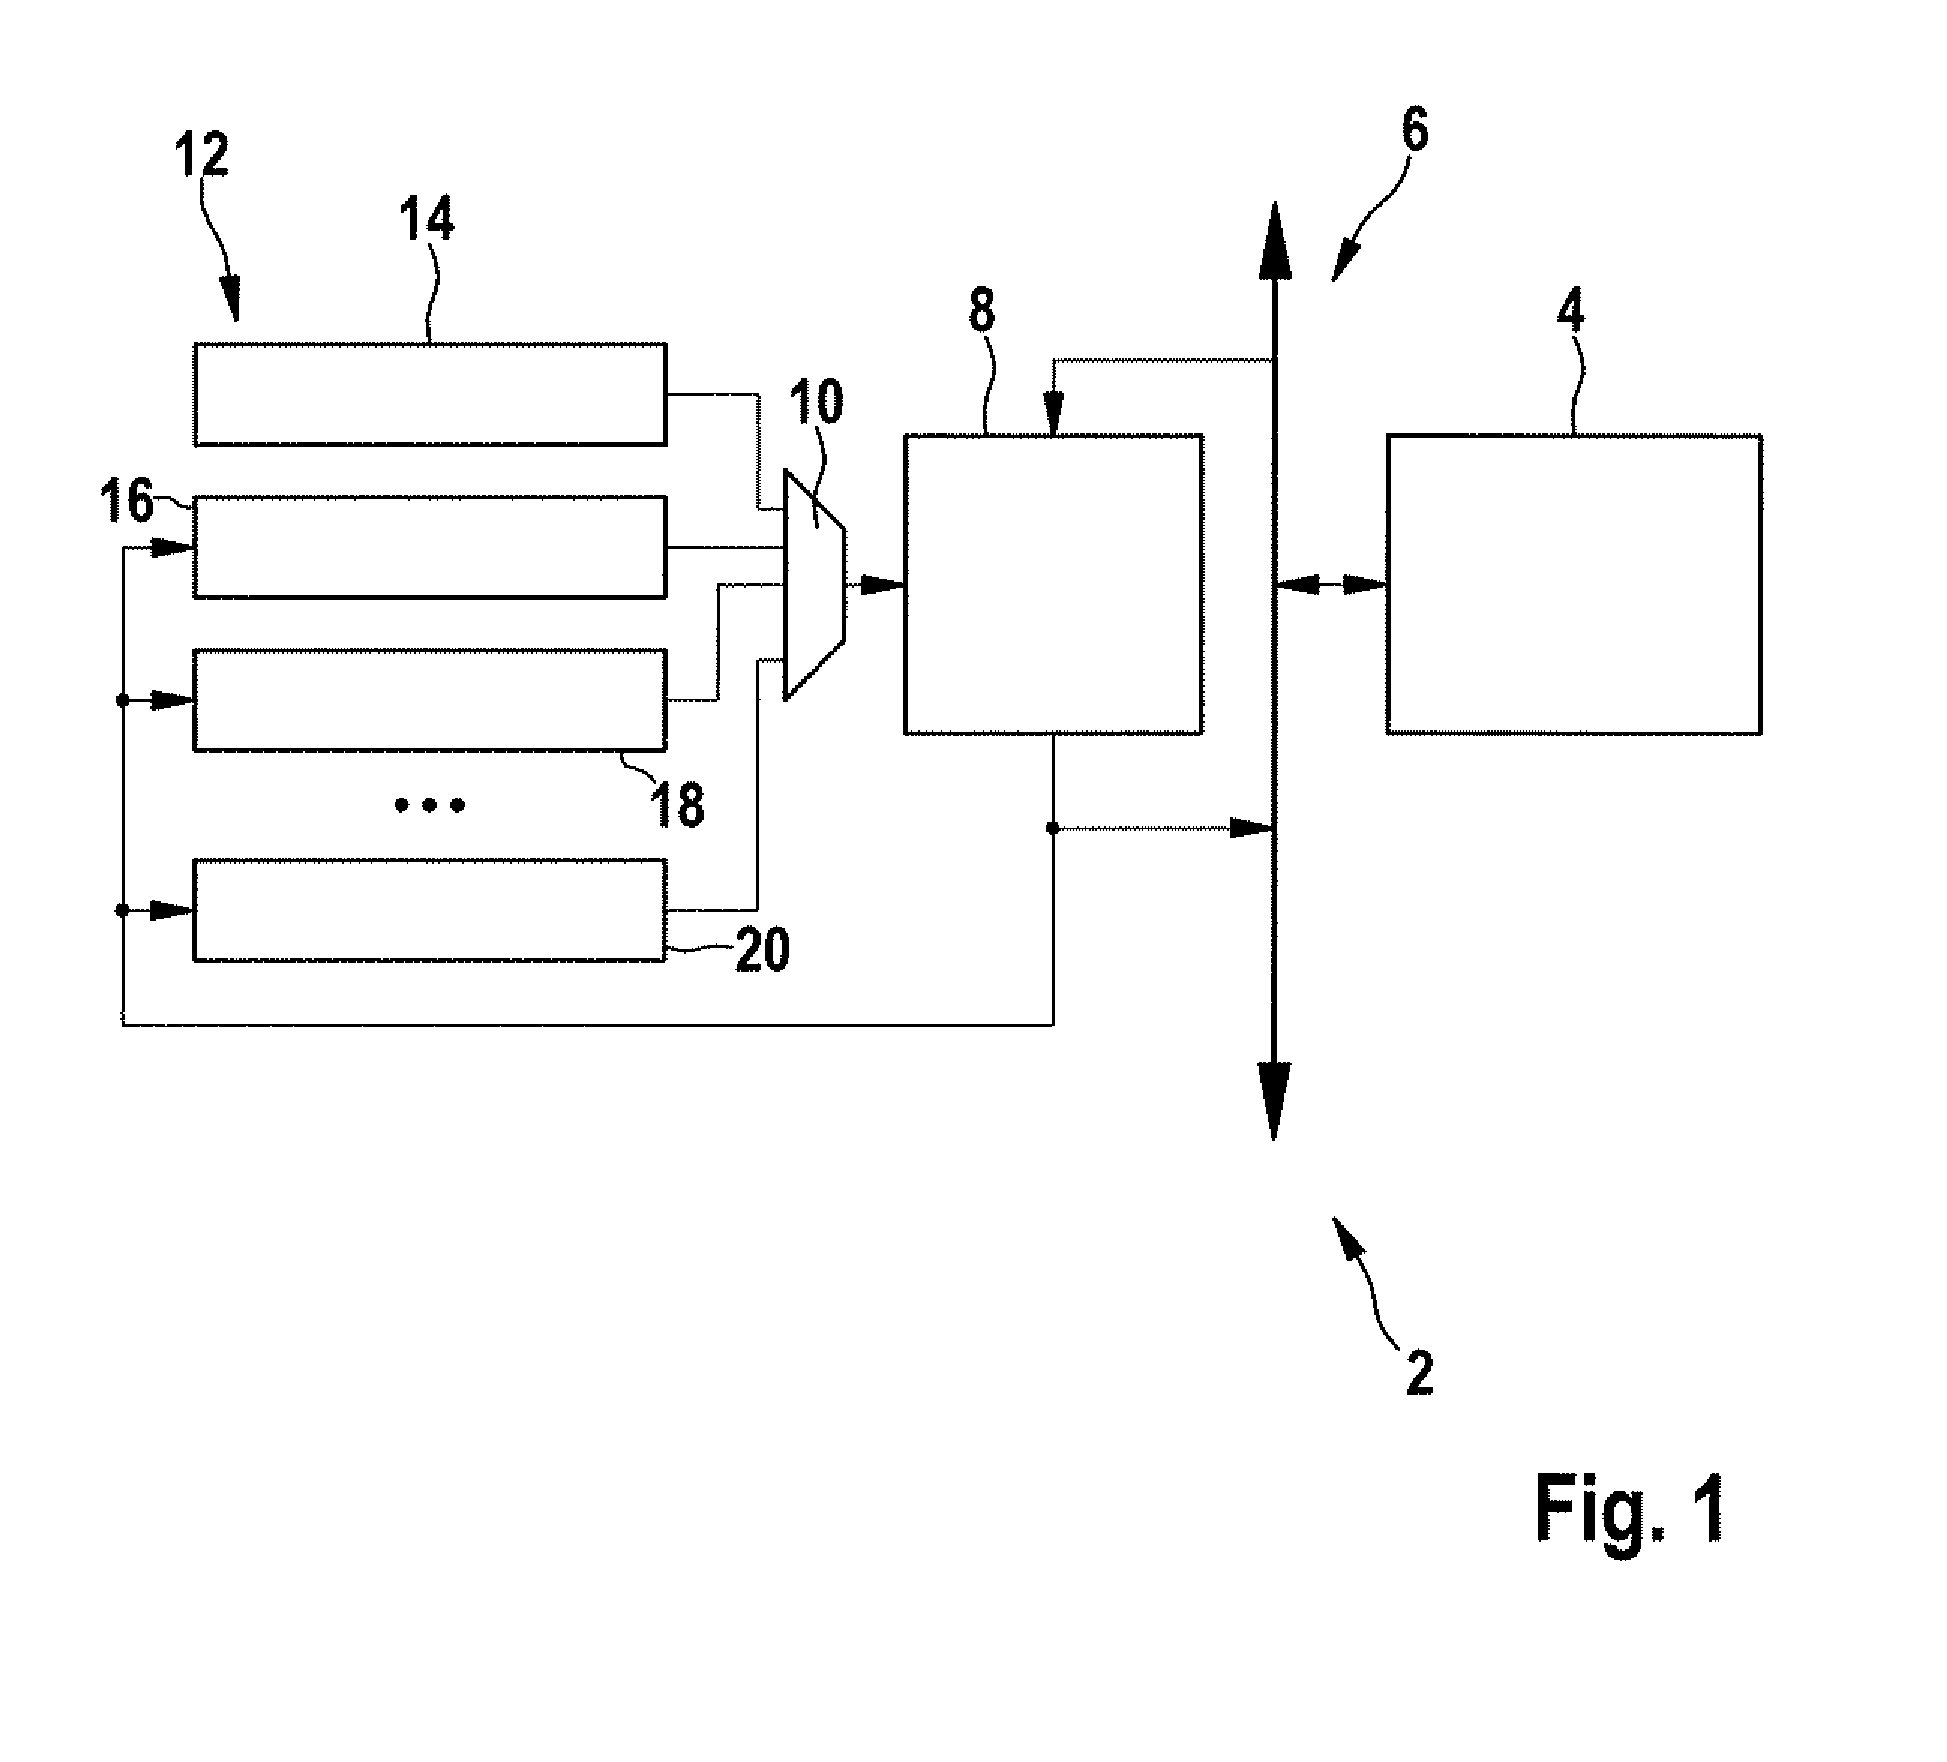 Method for operating a security device